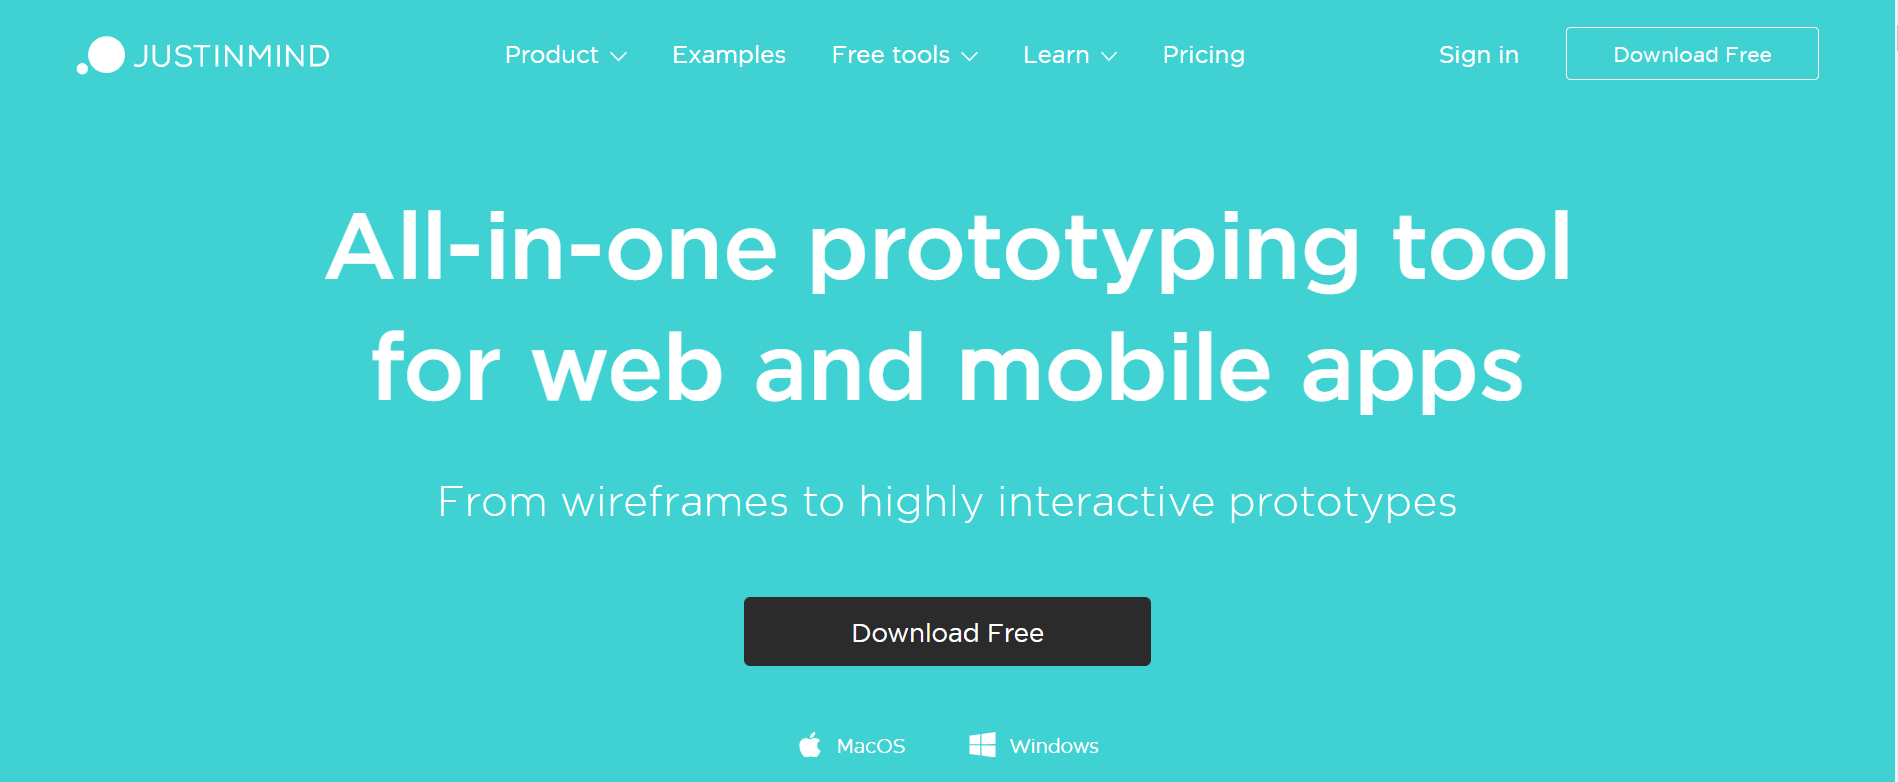 Free-prototyping-tool-for-web-mobile-apps-Justinmind.png